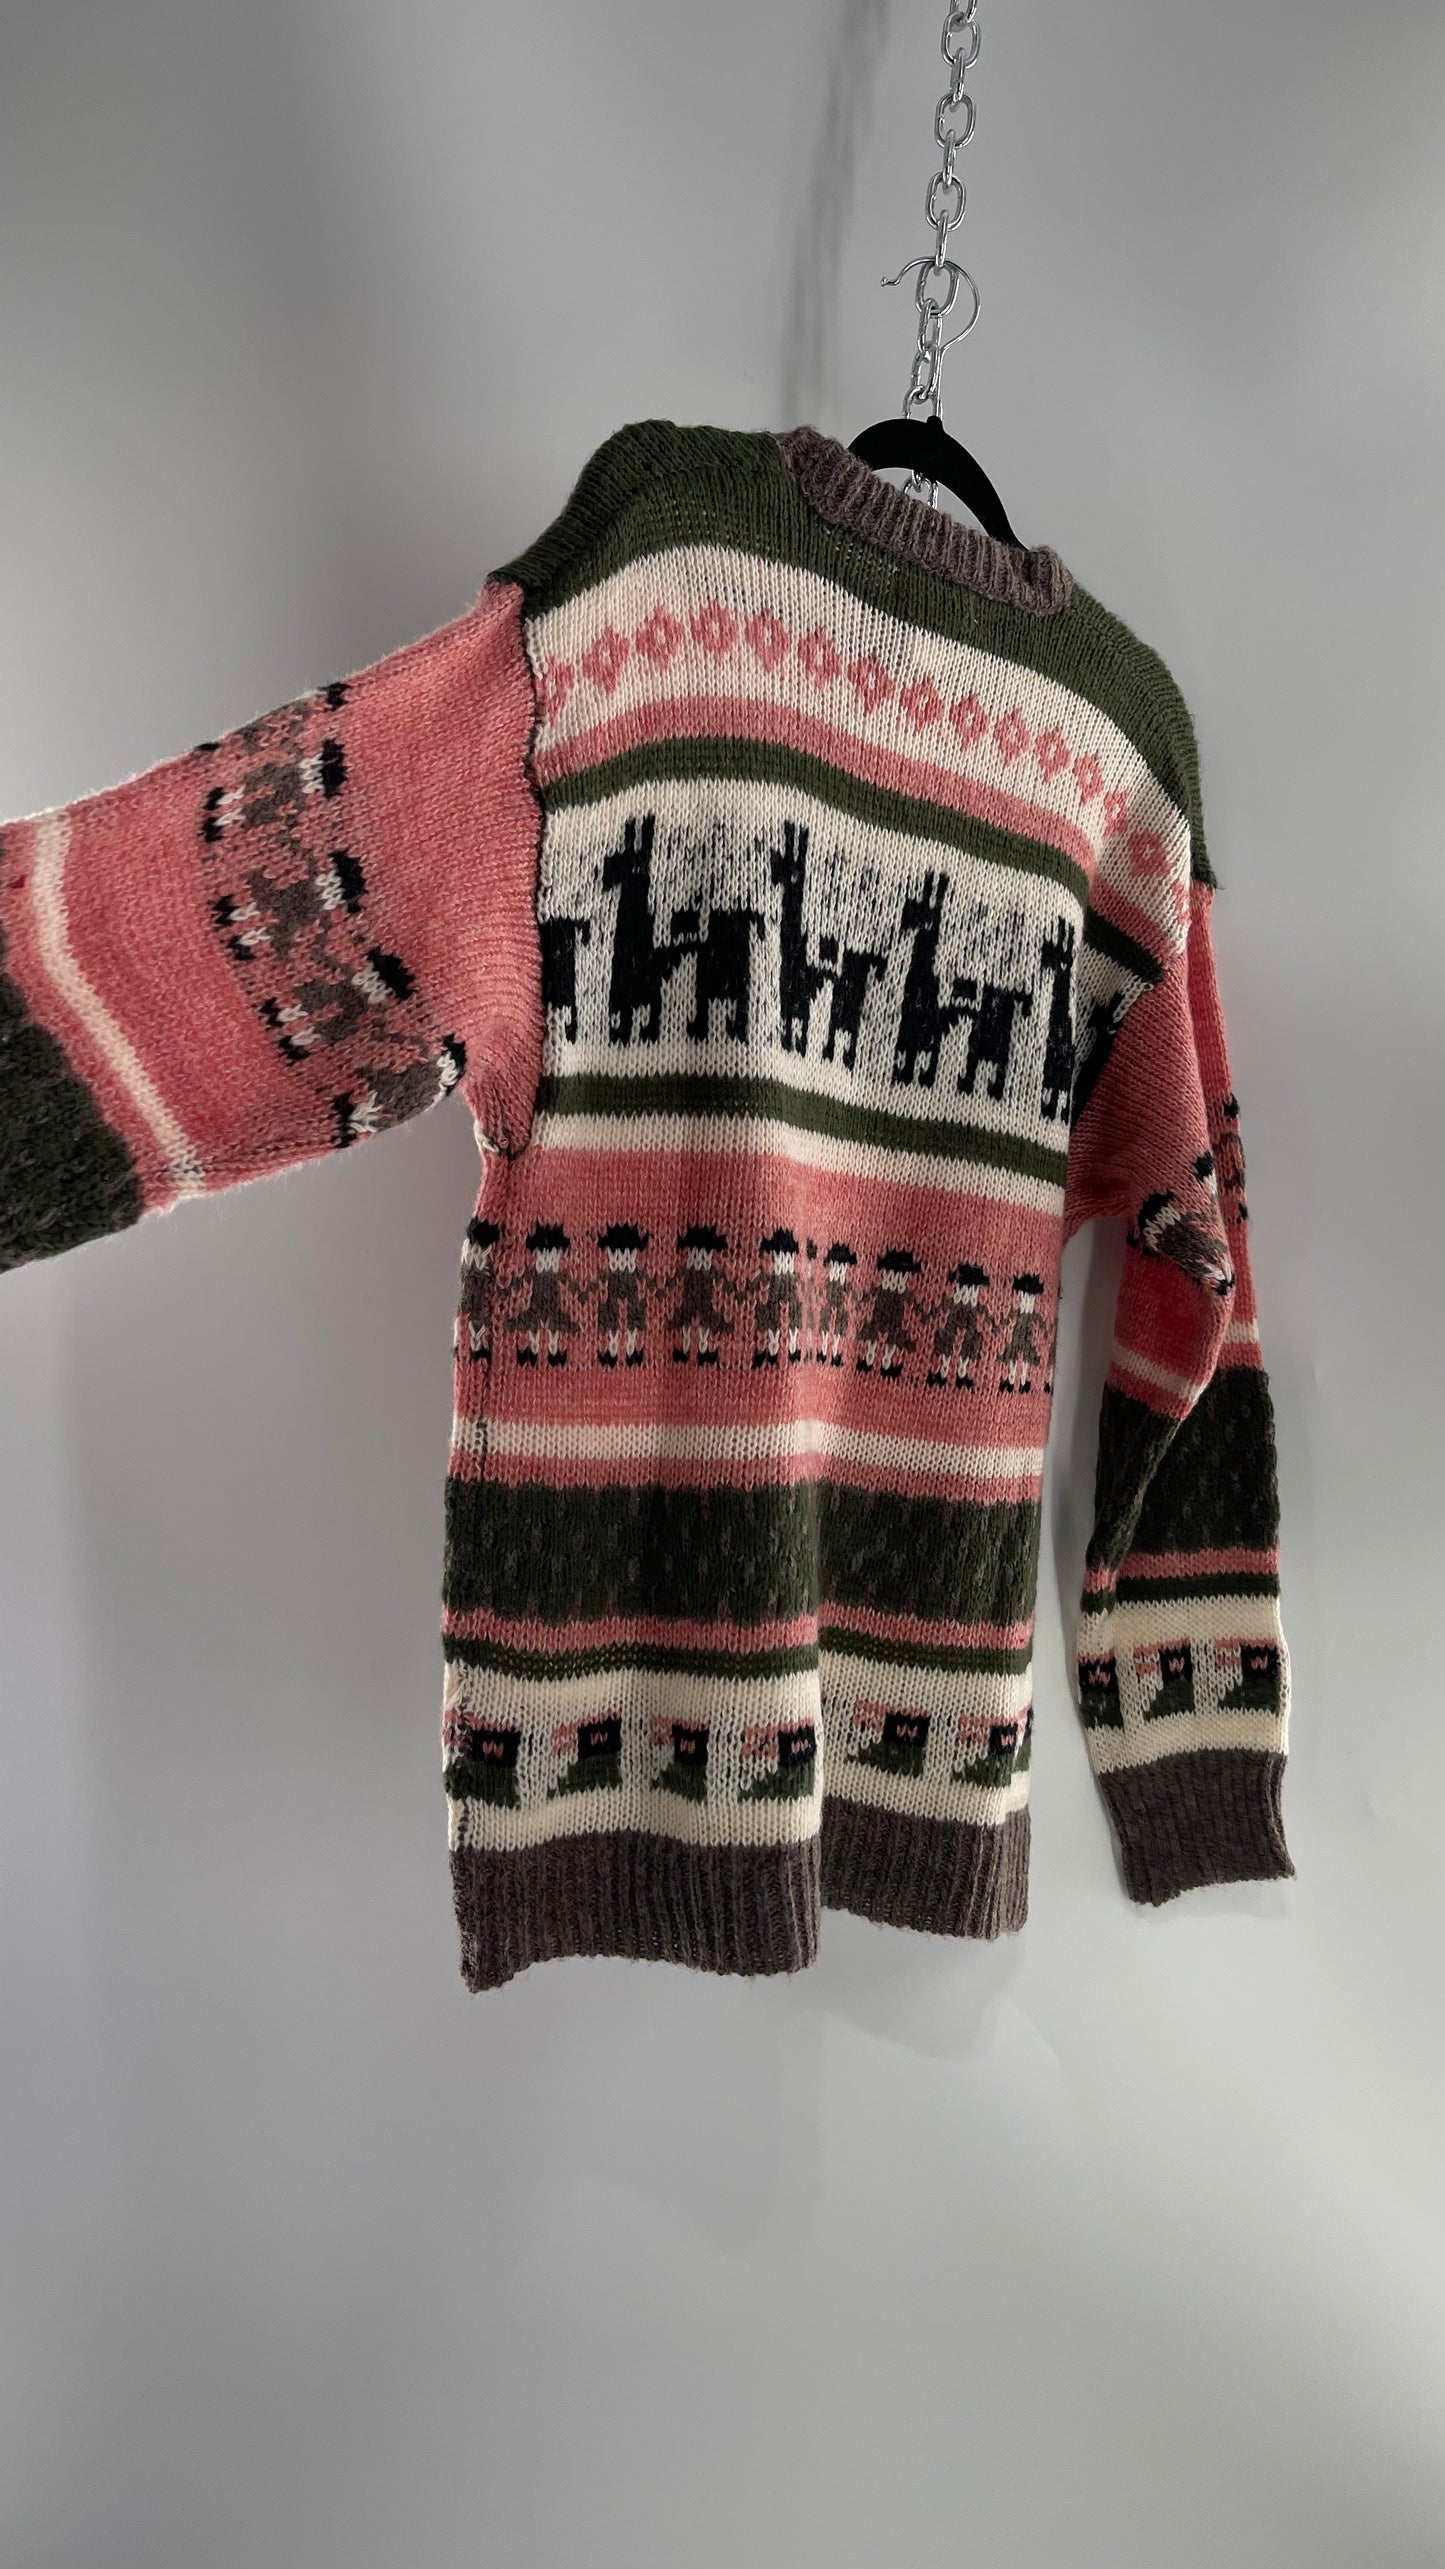 Cooke Collective Knit Llama/Alpaca Graphic Sweater with Army Green, Pink and White Colorway (Medium)